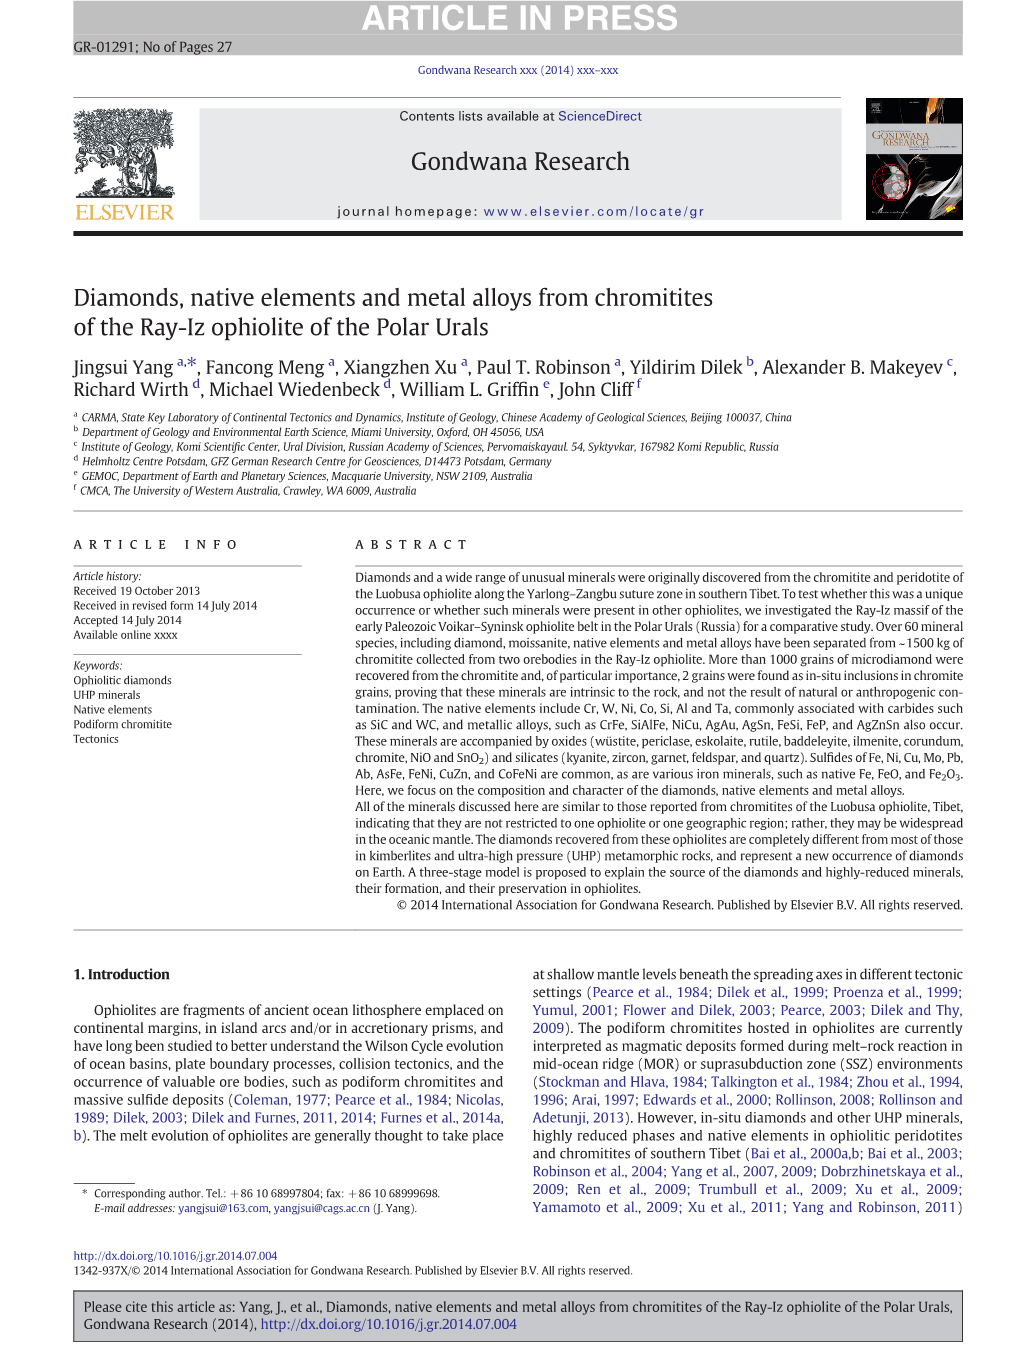 Diamonds, Native Elements and Metal Alloys from Chromitites of the Ray-Iz Ophiolite of the Polar Urals